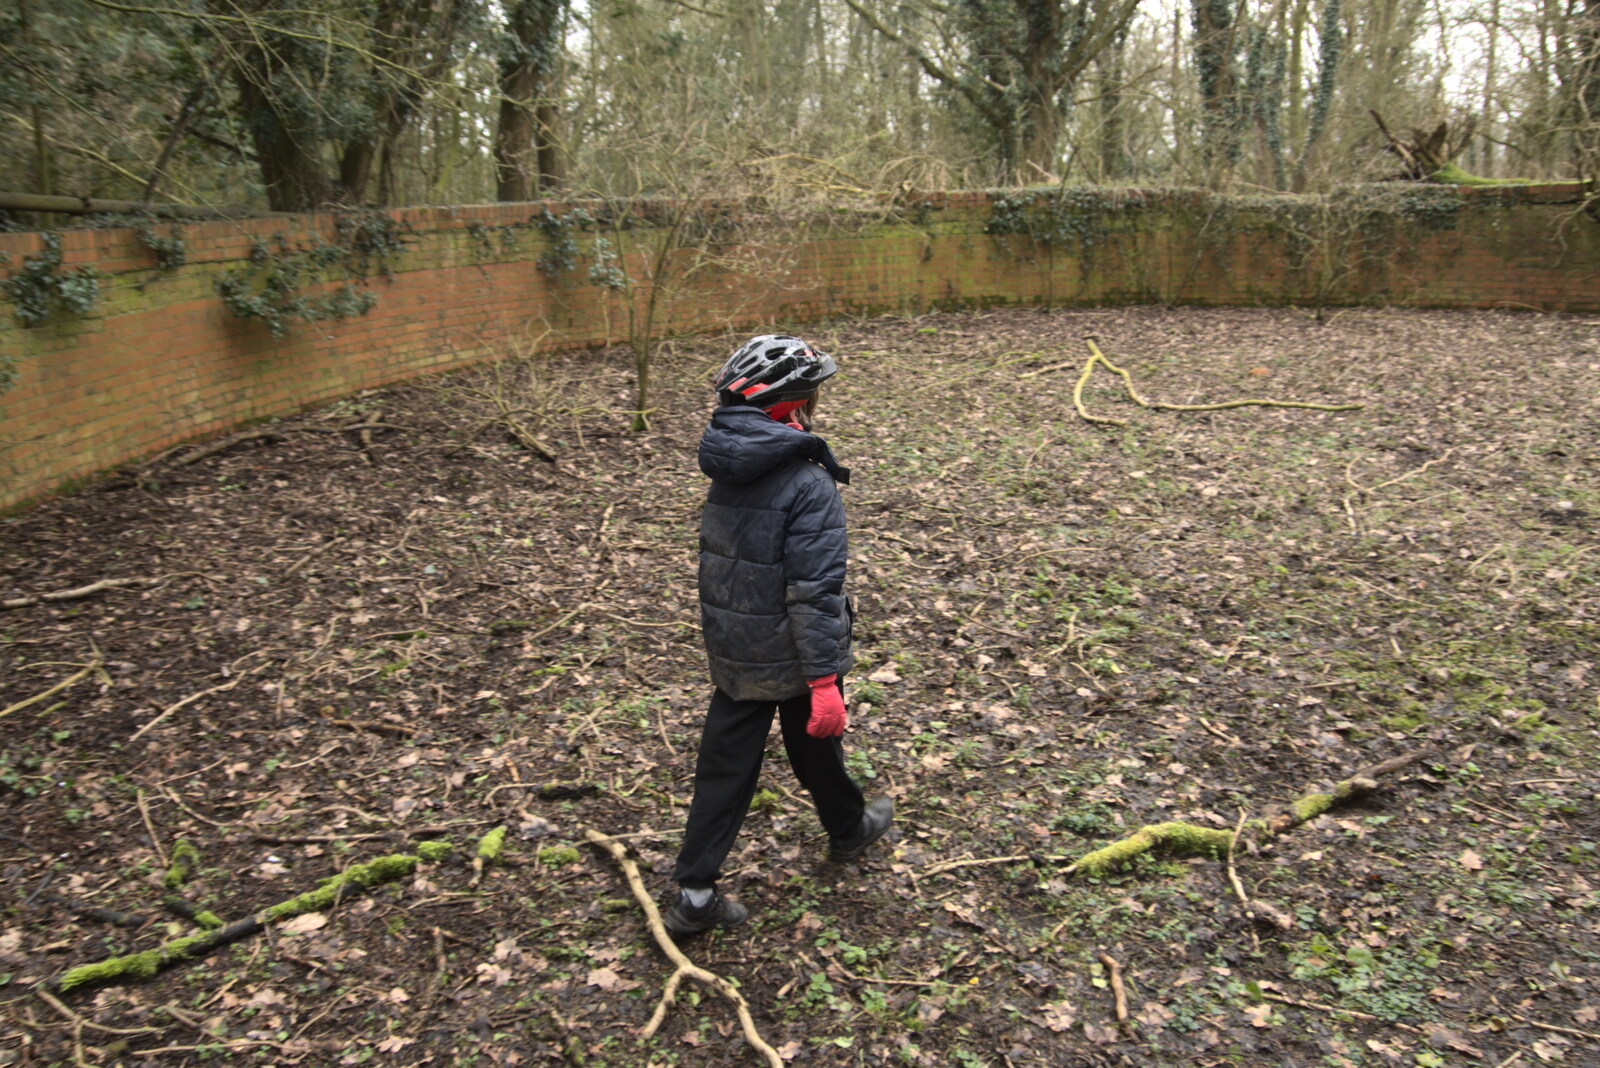 Harry roams around in the old sewage works from The Old Sewage Works, The Avenue, Brome, Suffolk - 20th February 2021